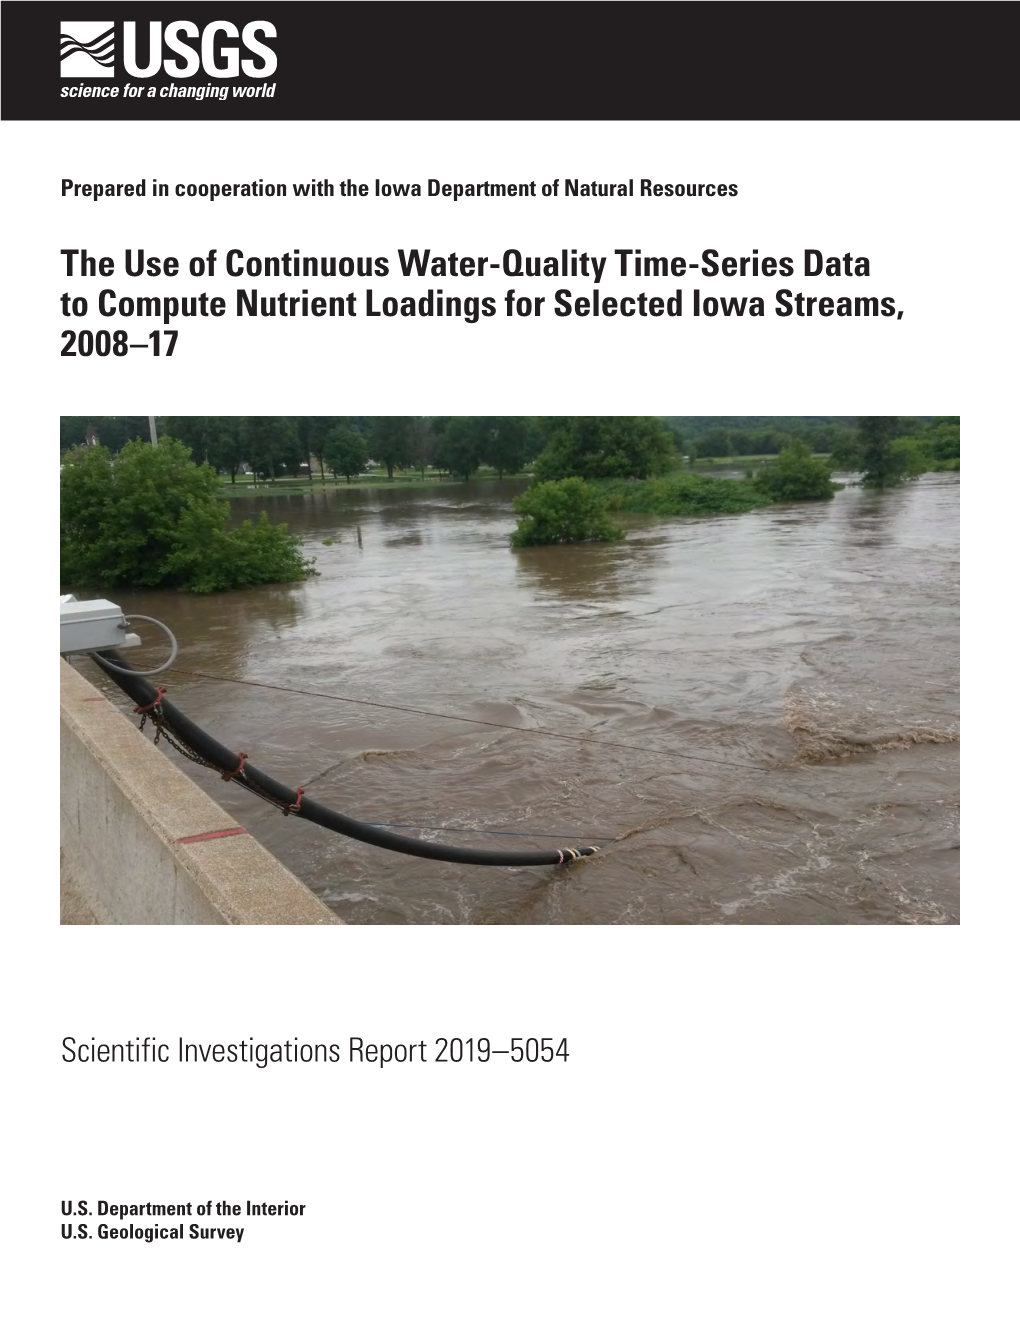 The Use of Continuous Water-Quality Time-Series Data to Compute Nutrient Loadings for Selected Iowa Streams, 2008–17